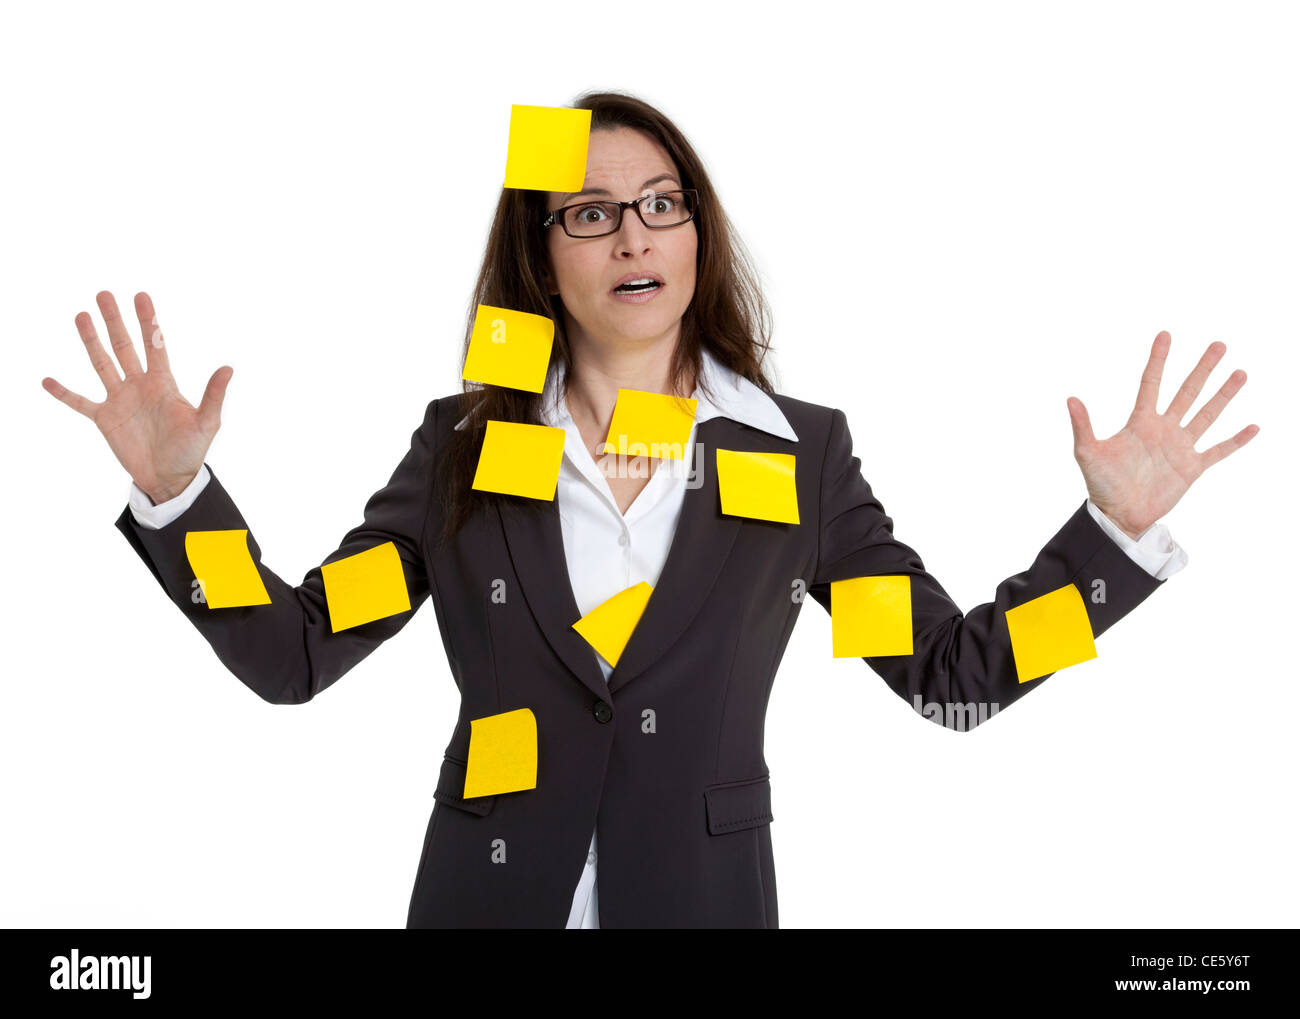 Stressed out business woman with numerous post-it notes stuck on her. White background. Stock Photo